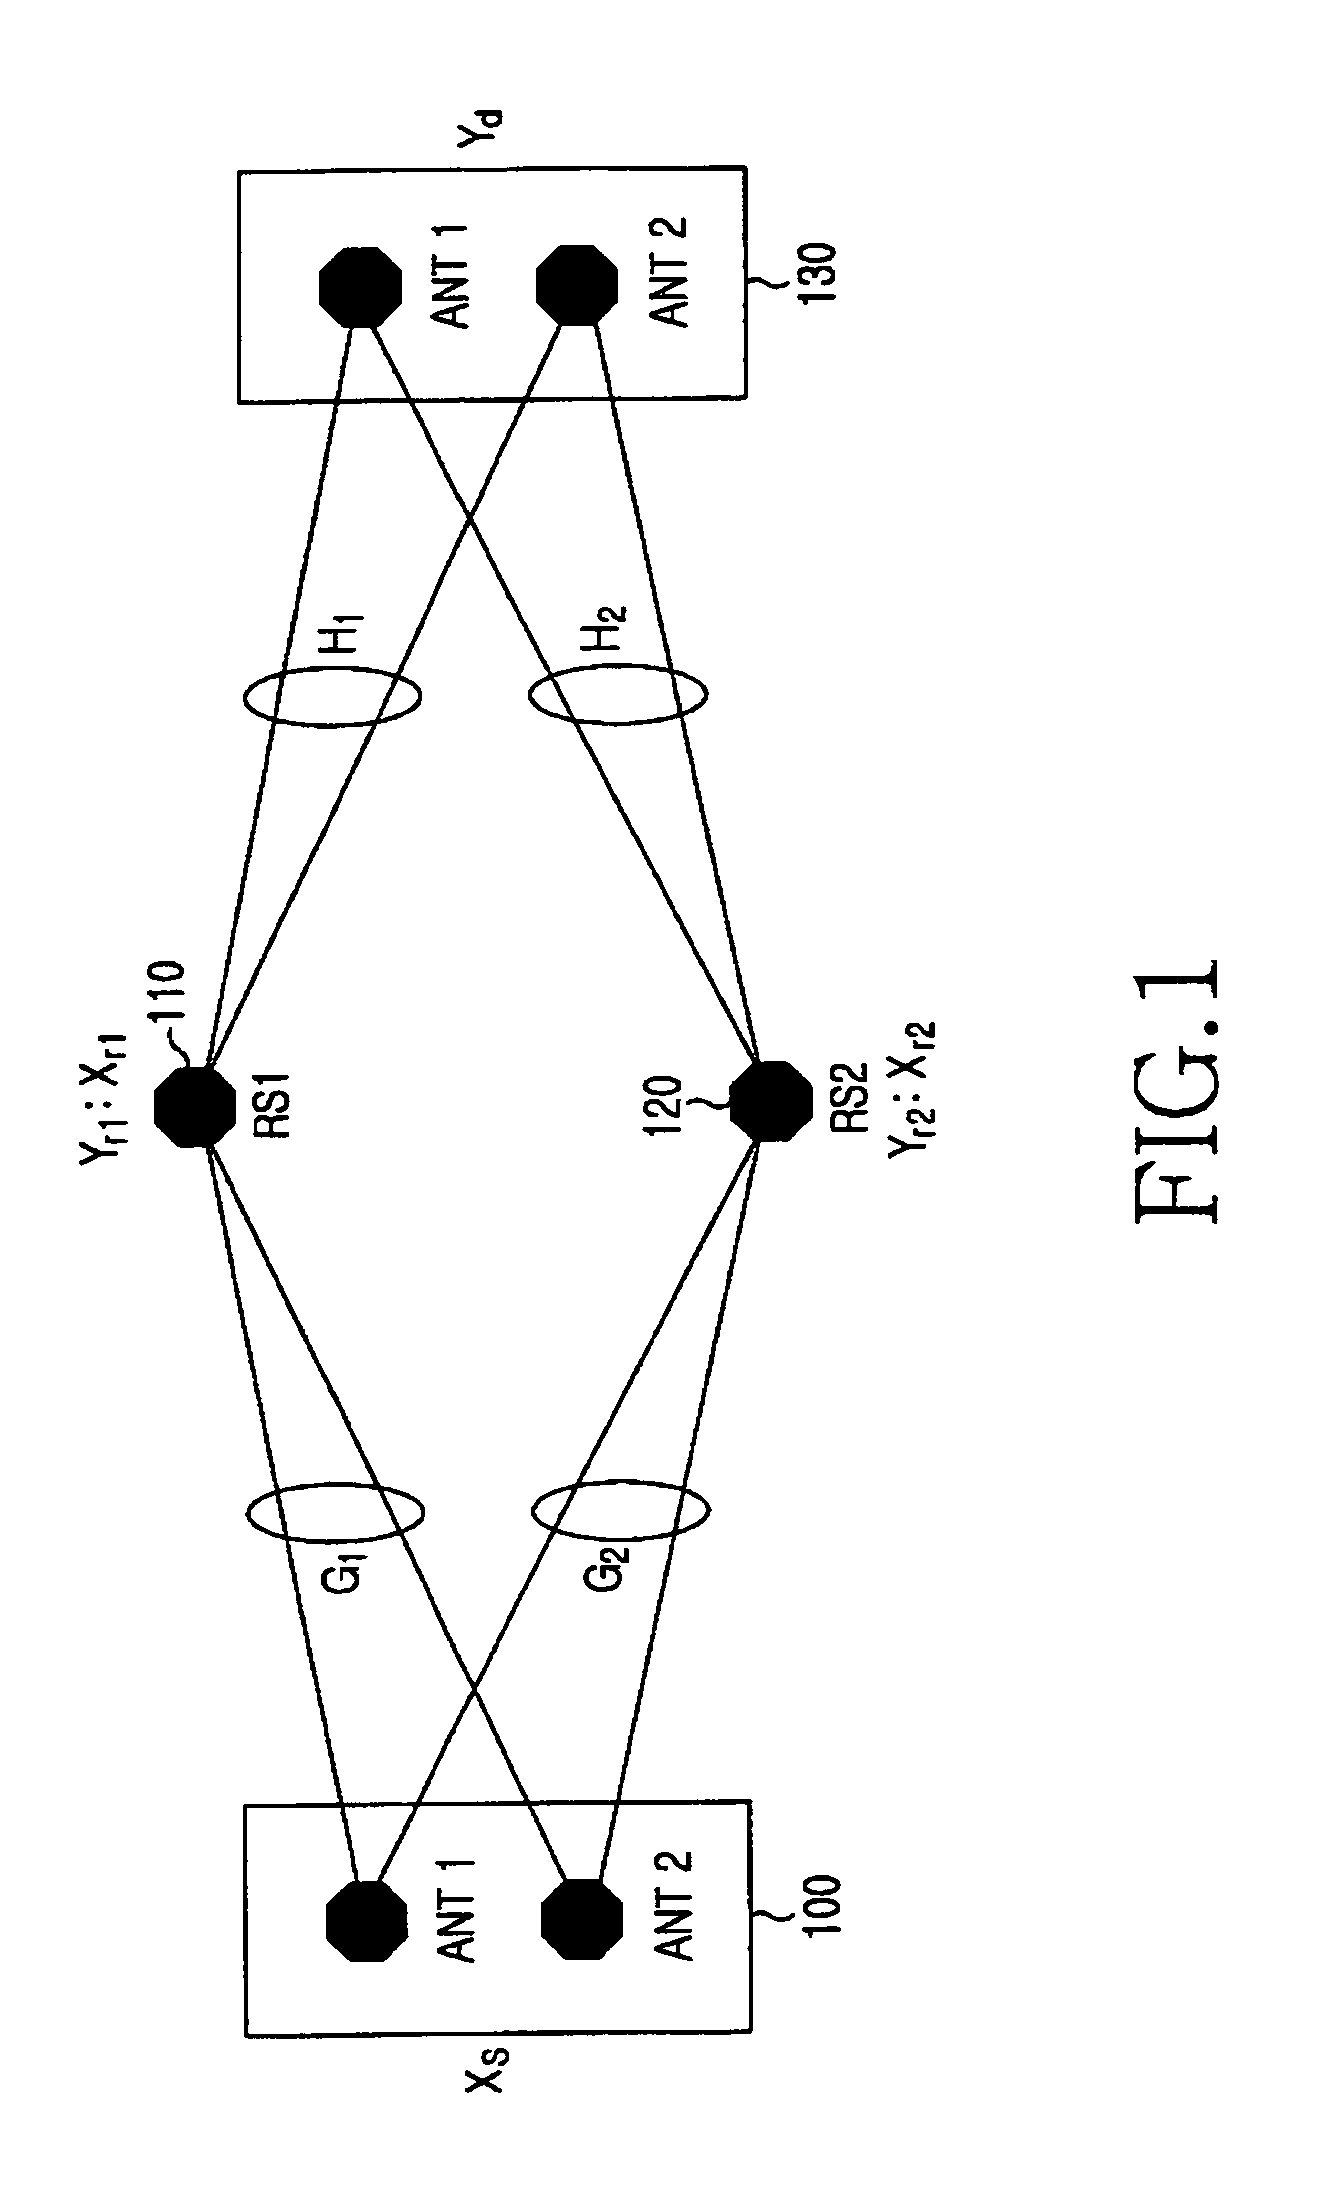 Apparatus and method for cooperative relay in a wireless communication system based on relay stations